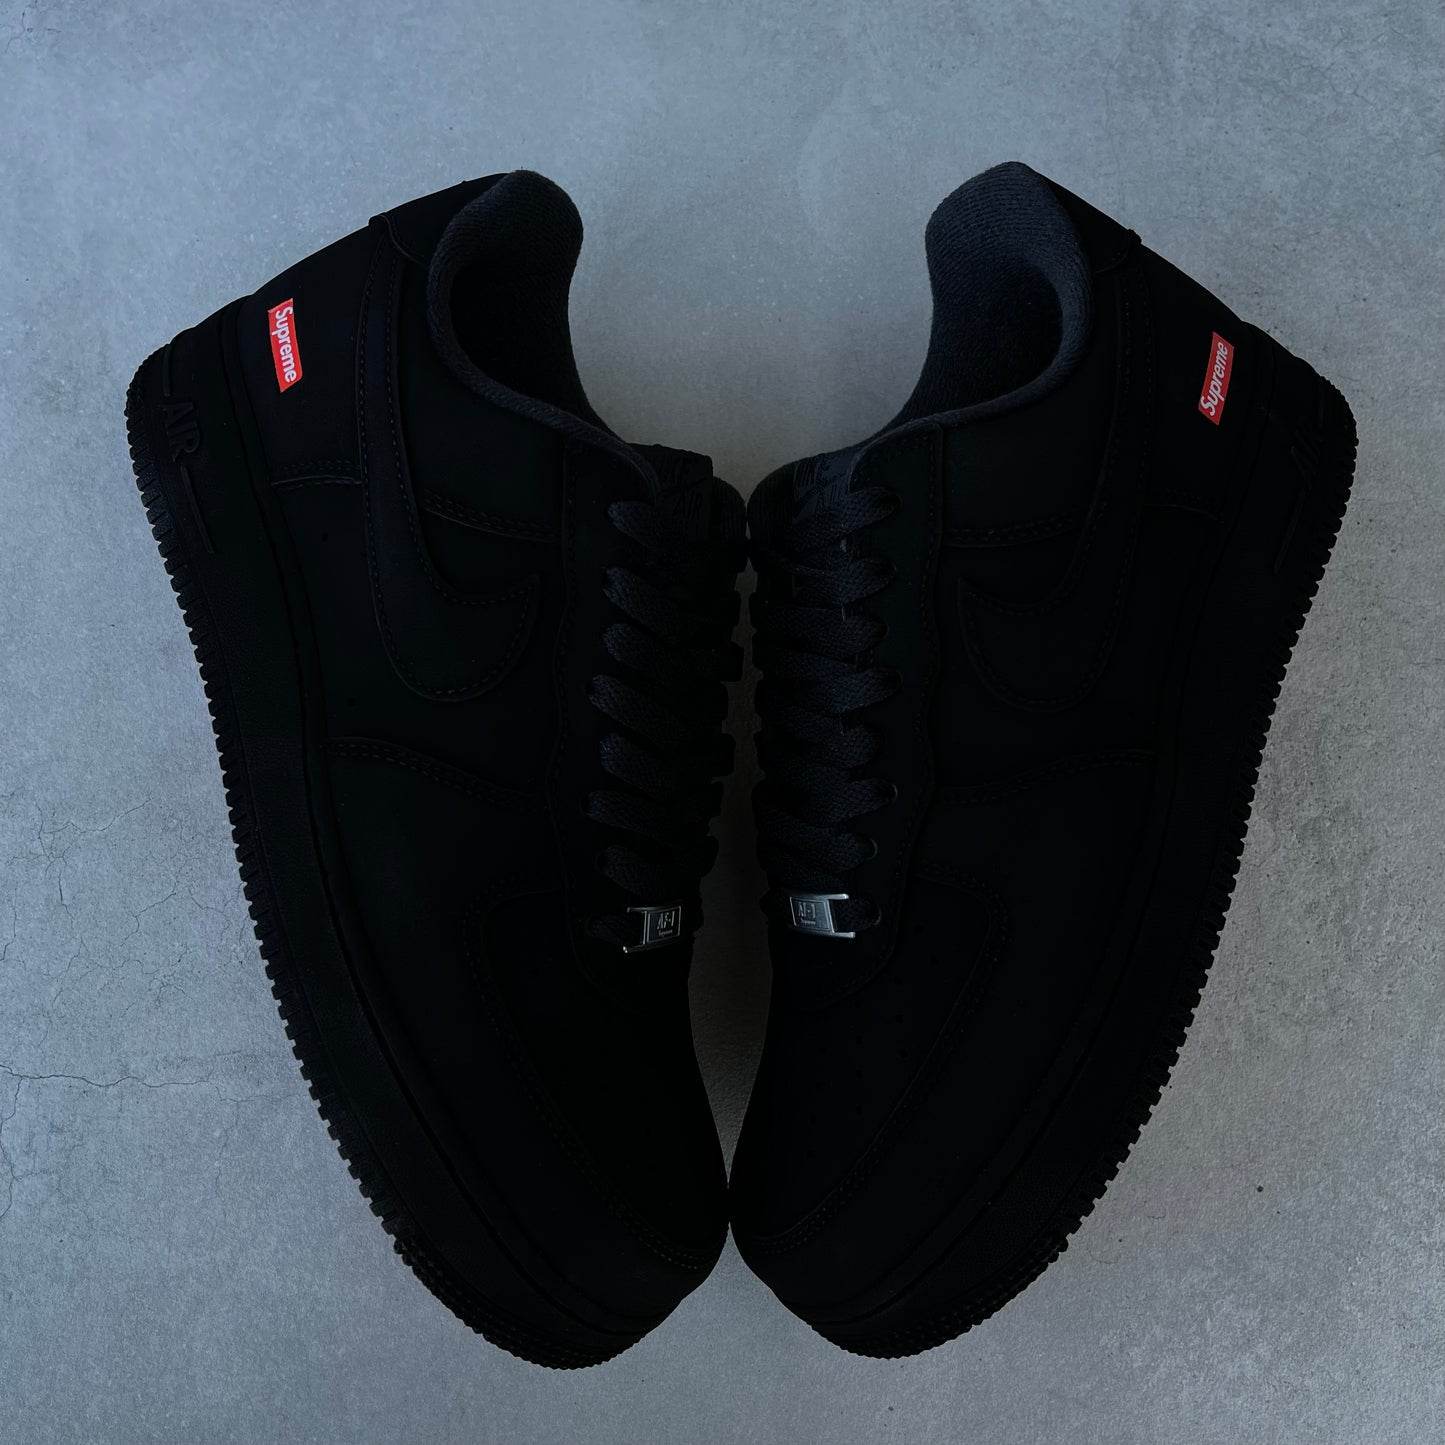 Custom AIR FORCE 1 Supreme - Blackest (with red soles)